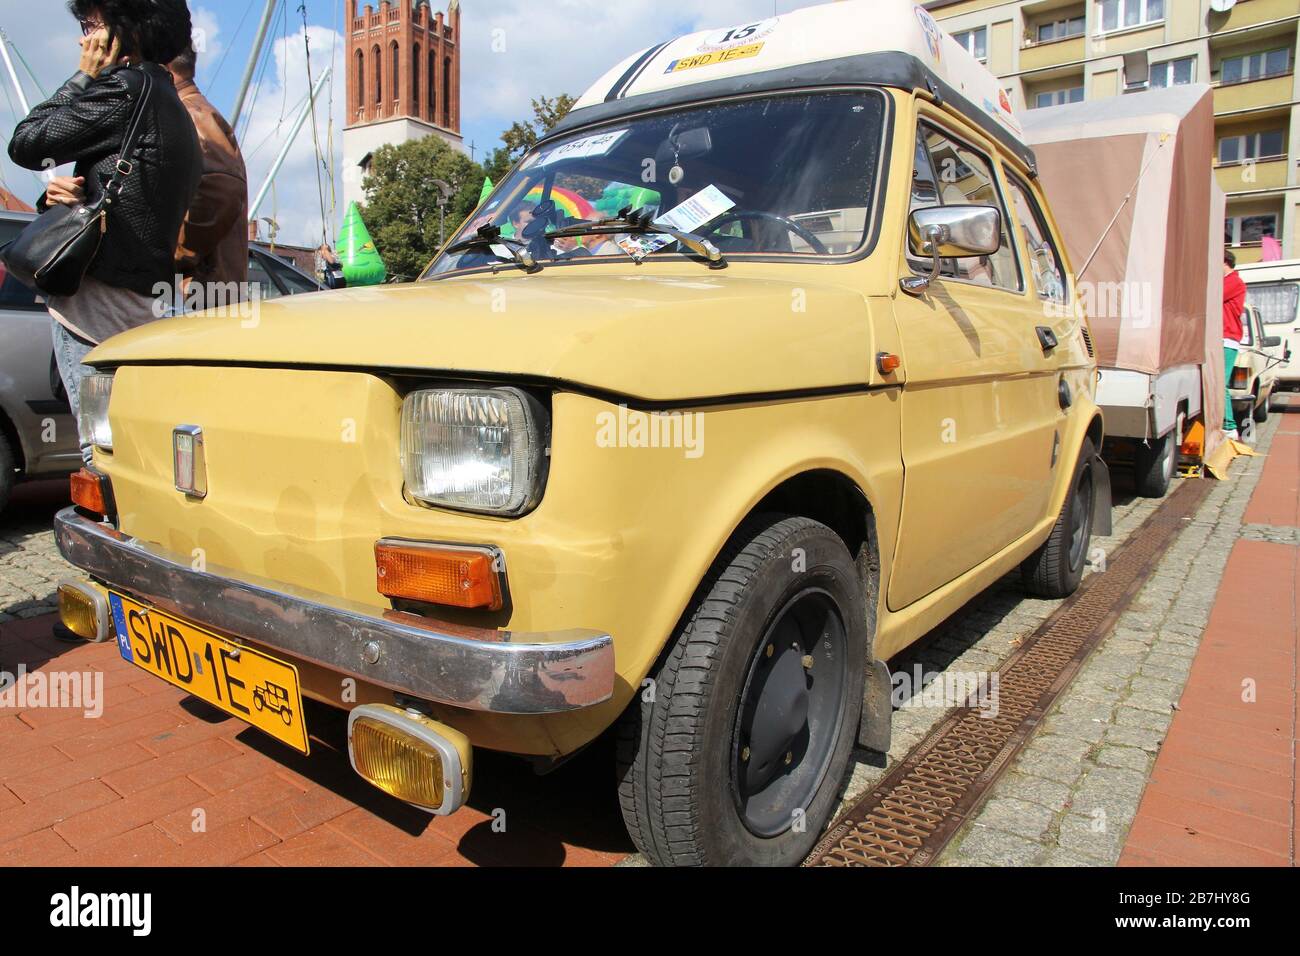 BYTOM, POLAND - SEPTEMBER 12, 2015: People admire Polski Fiat 126p during 12th Historic Vehicle Rally in Bytom. The annual vehicle parade is one of ma Stock Photo